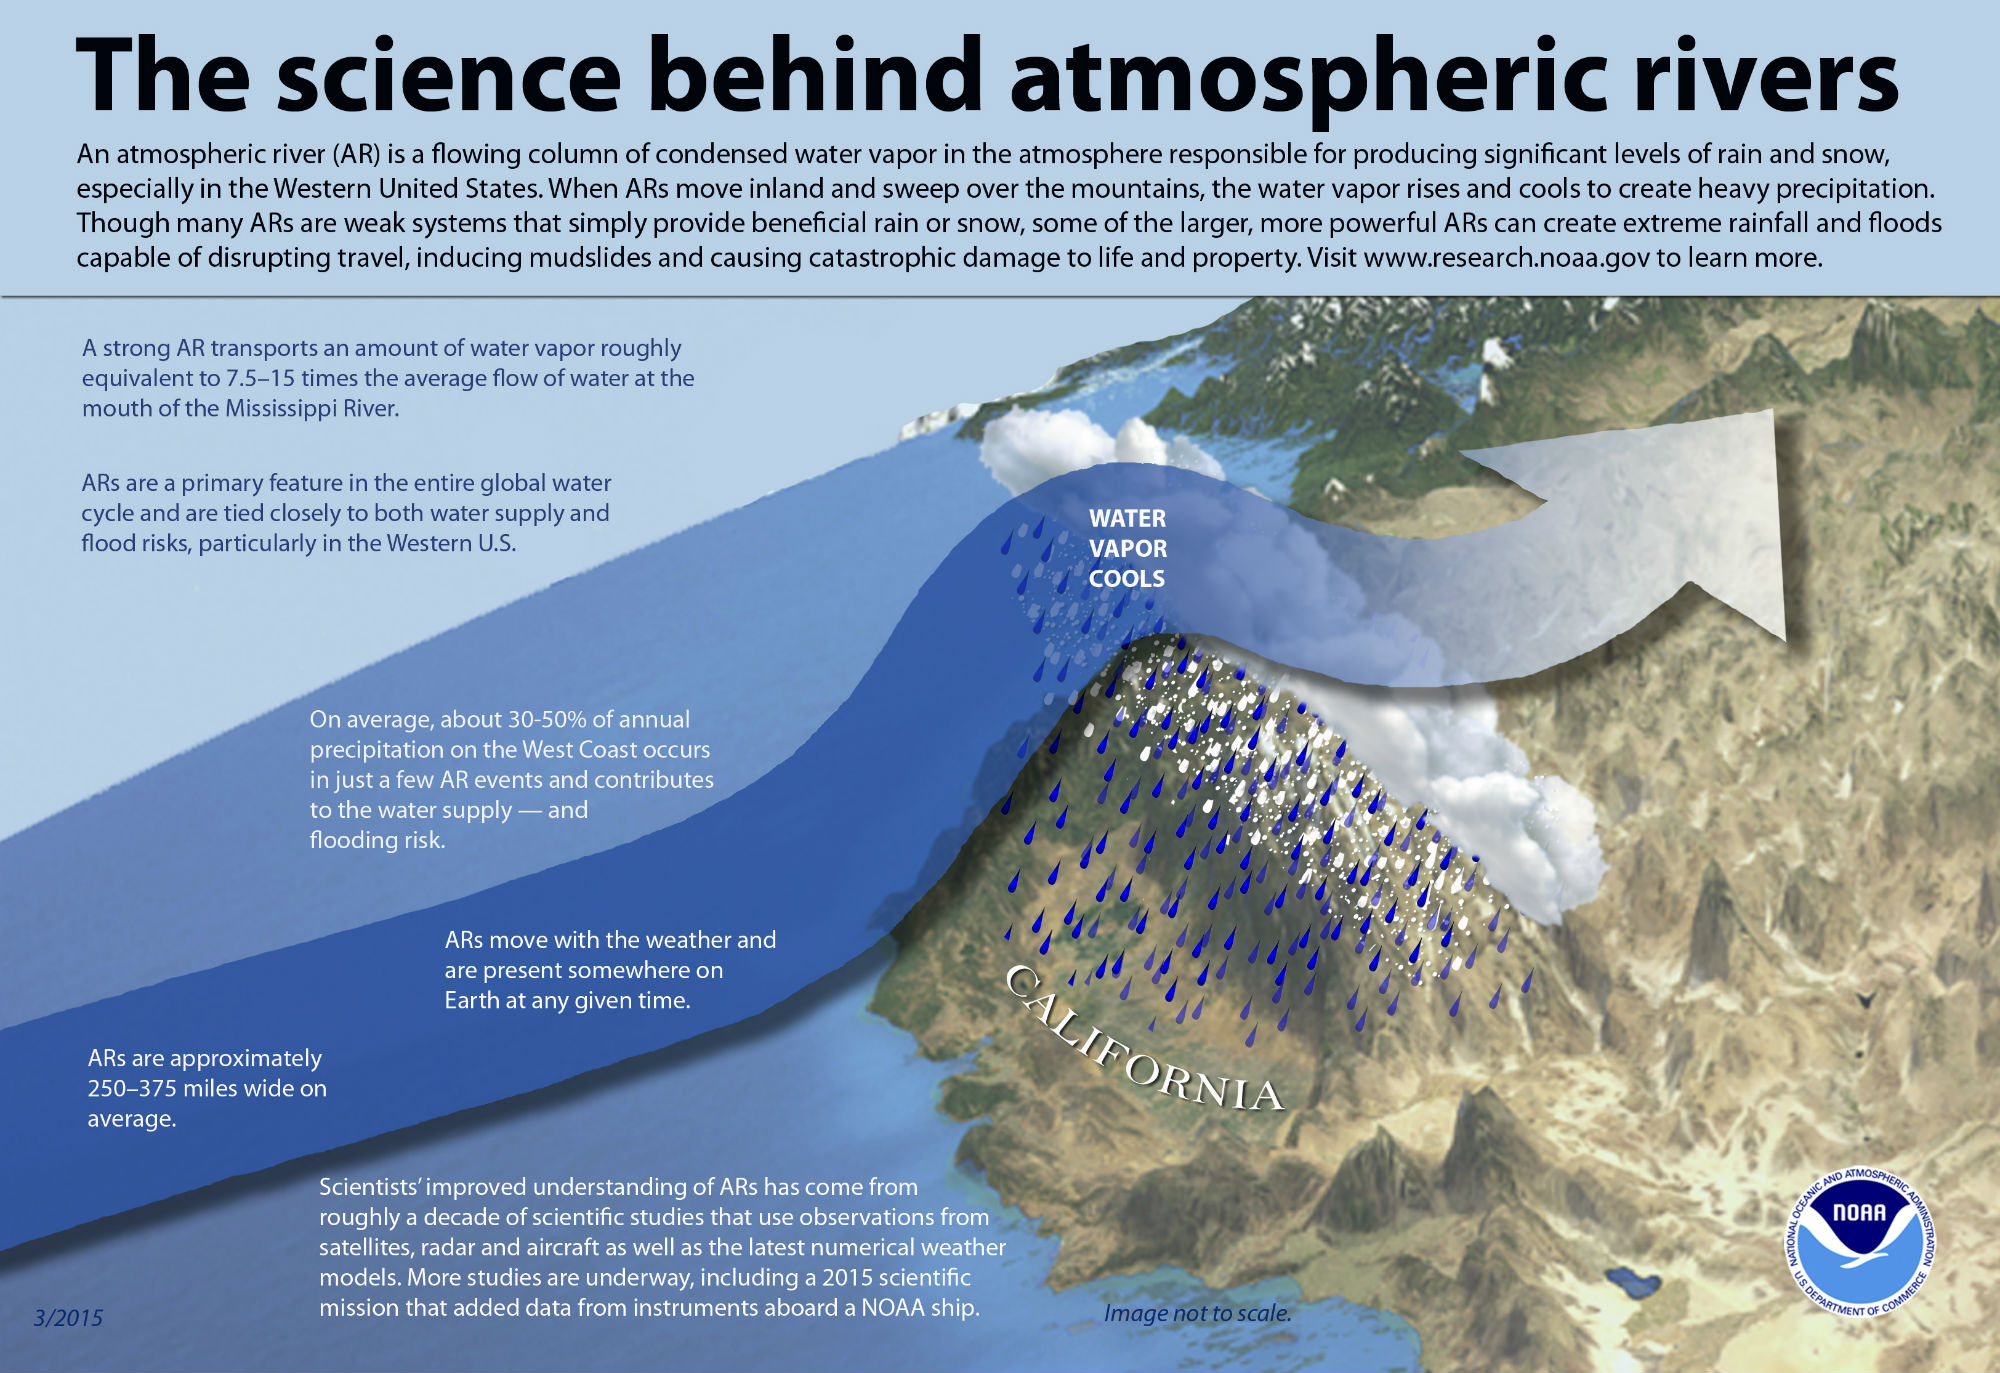 Illustration of atmospheric rivers